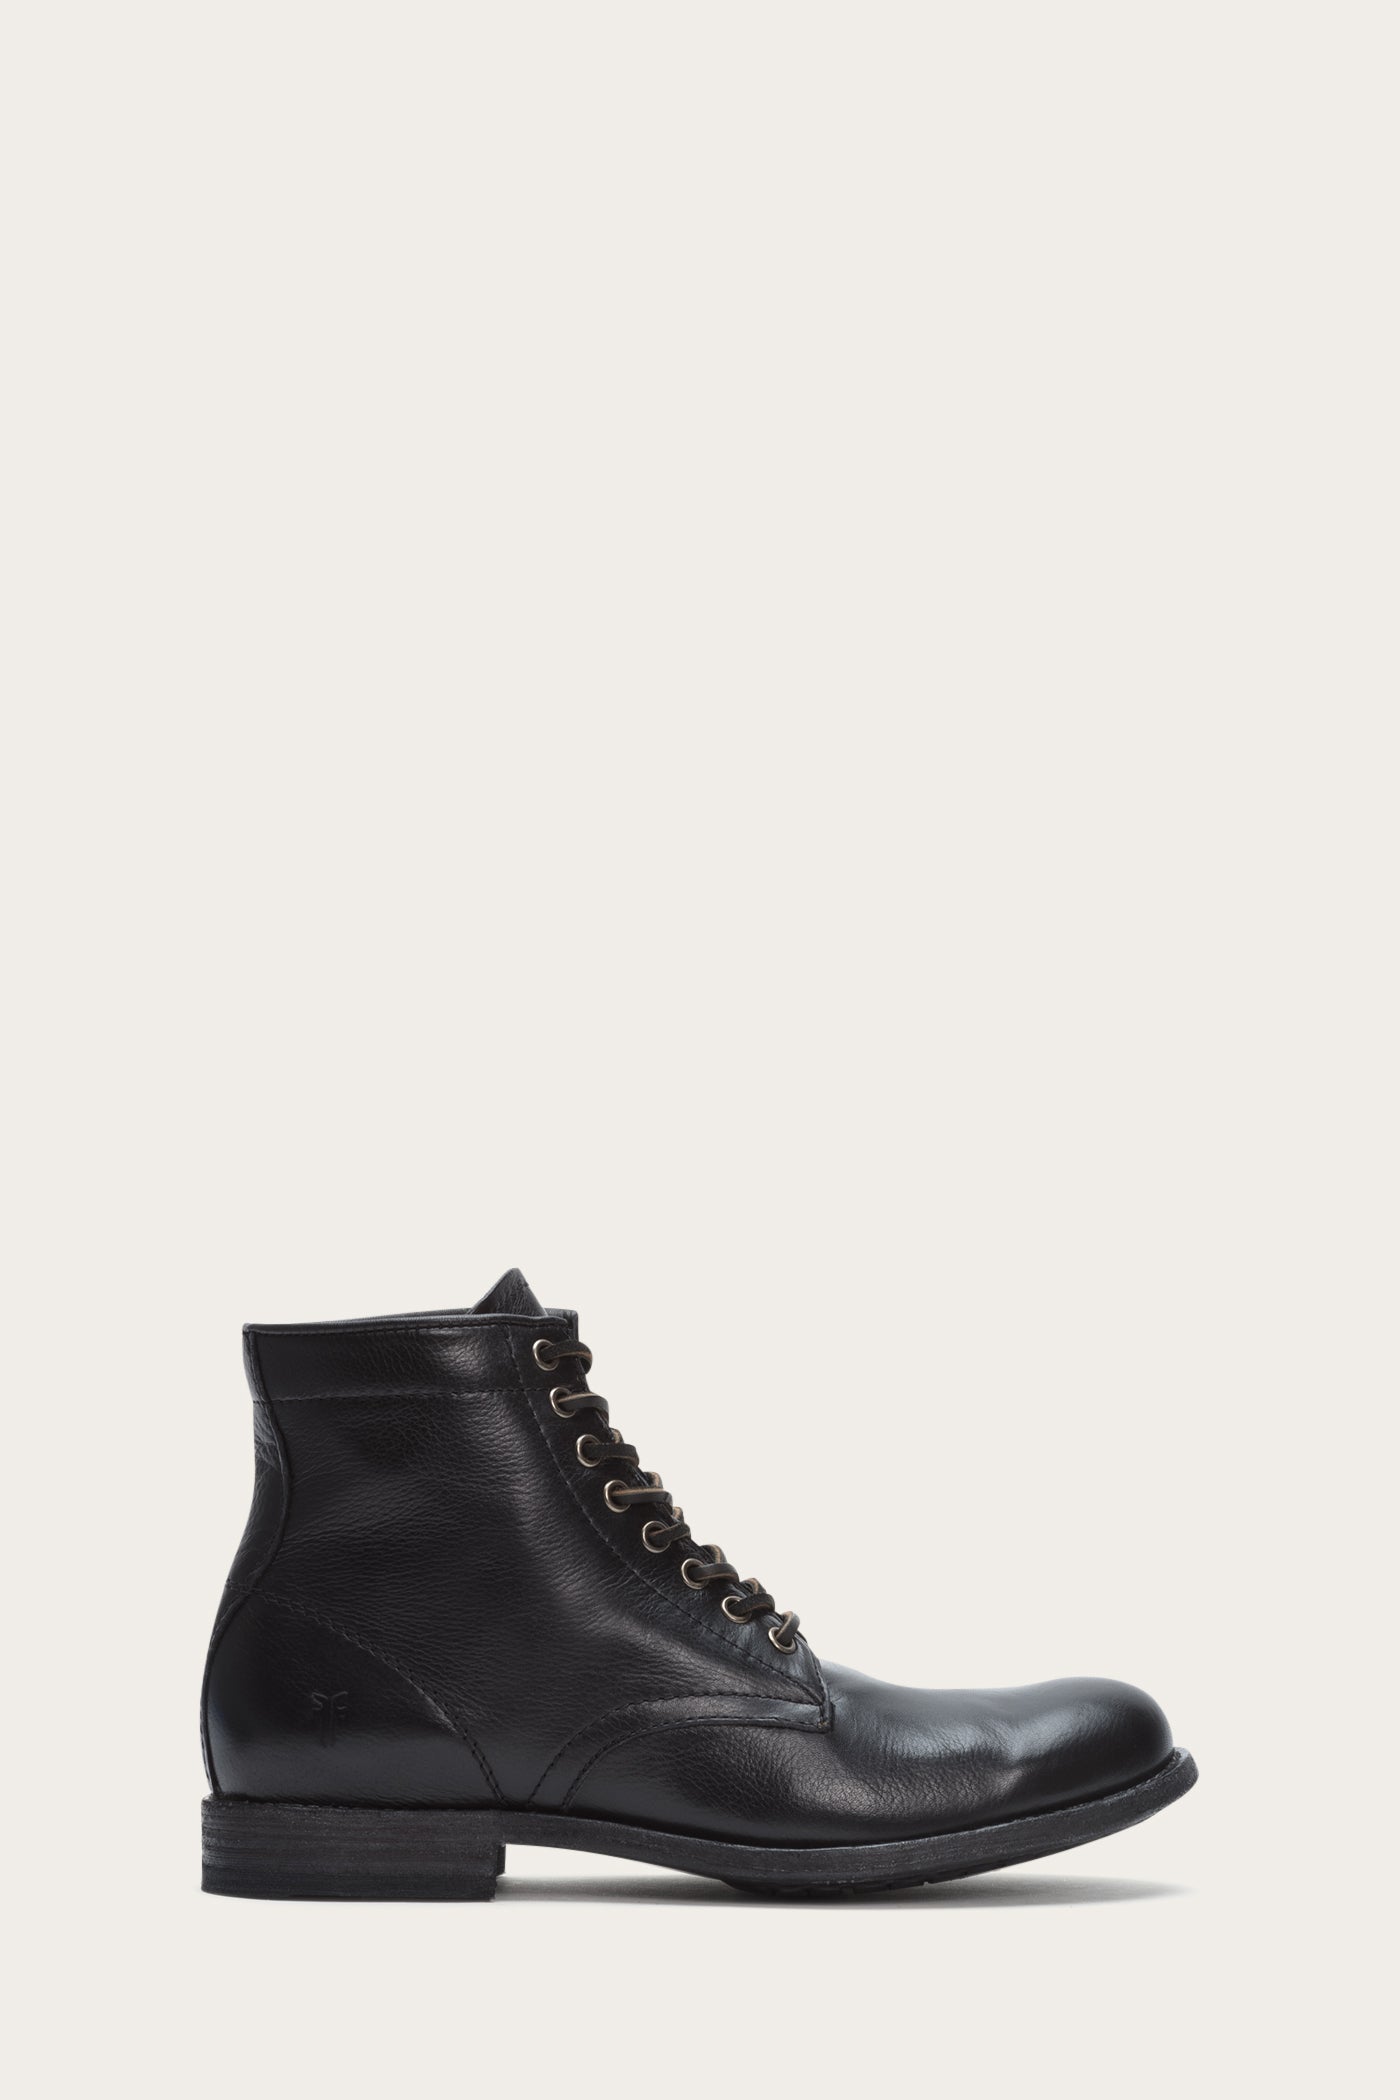 frye tyler leather lace up boot